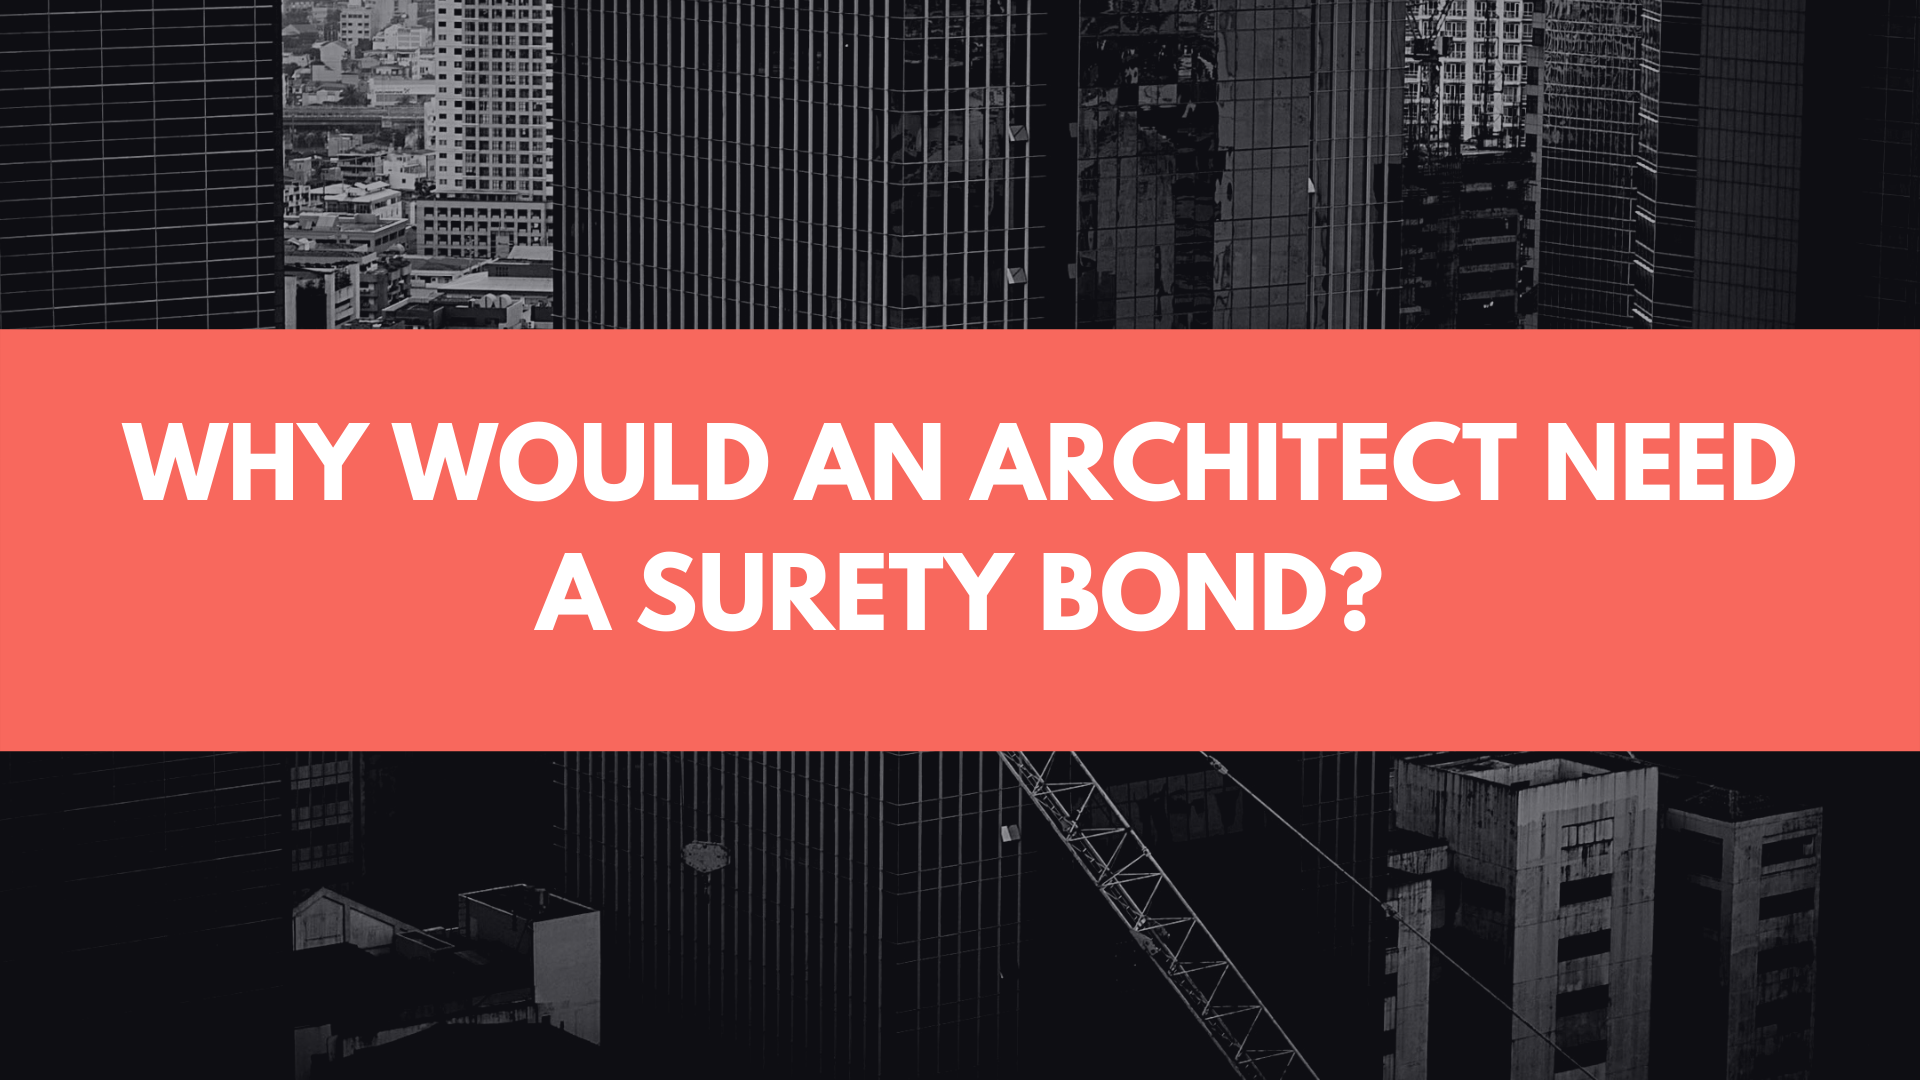 surety bond - Why is a surety bond needed by an architect - buildings